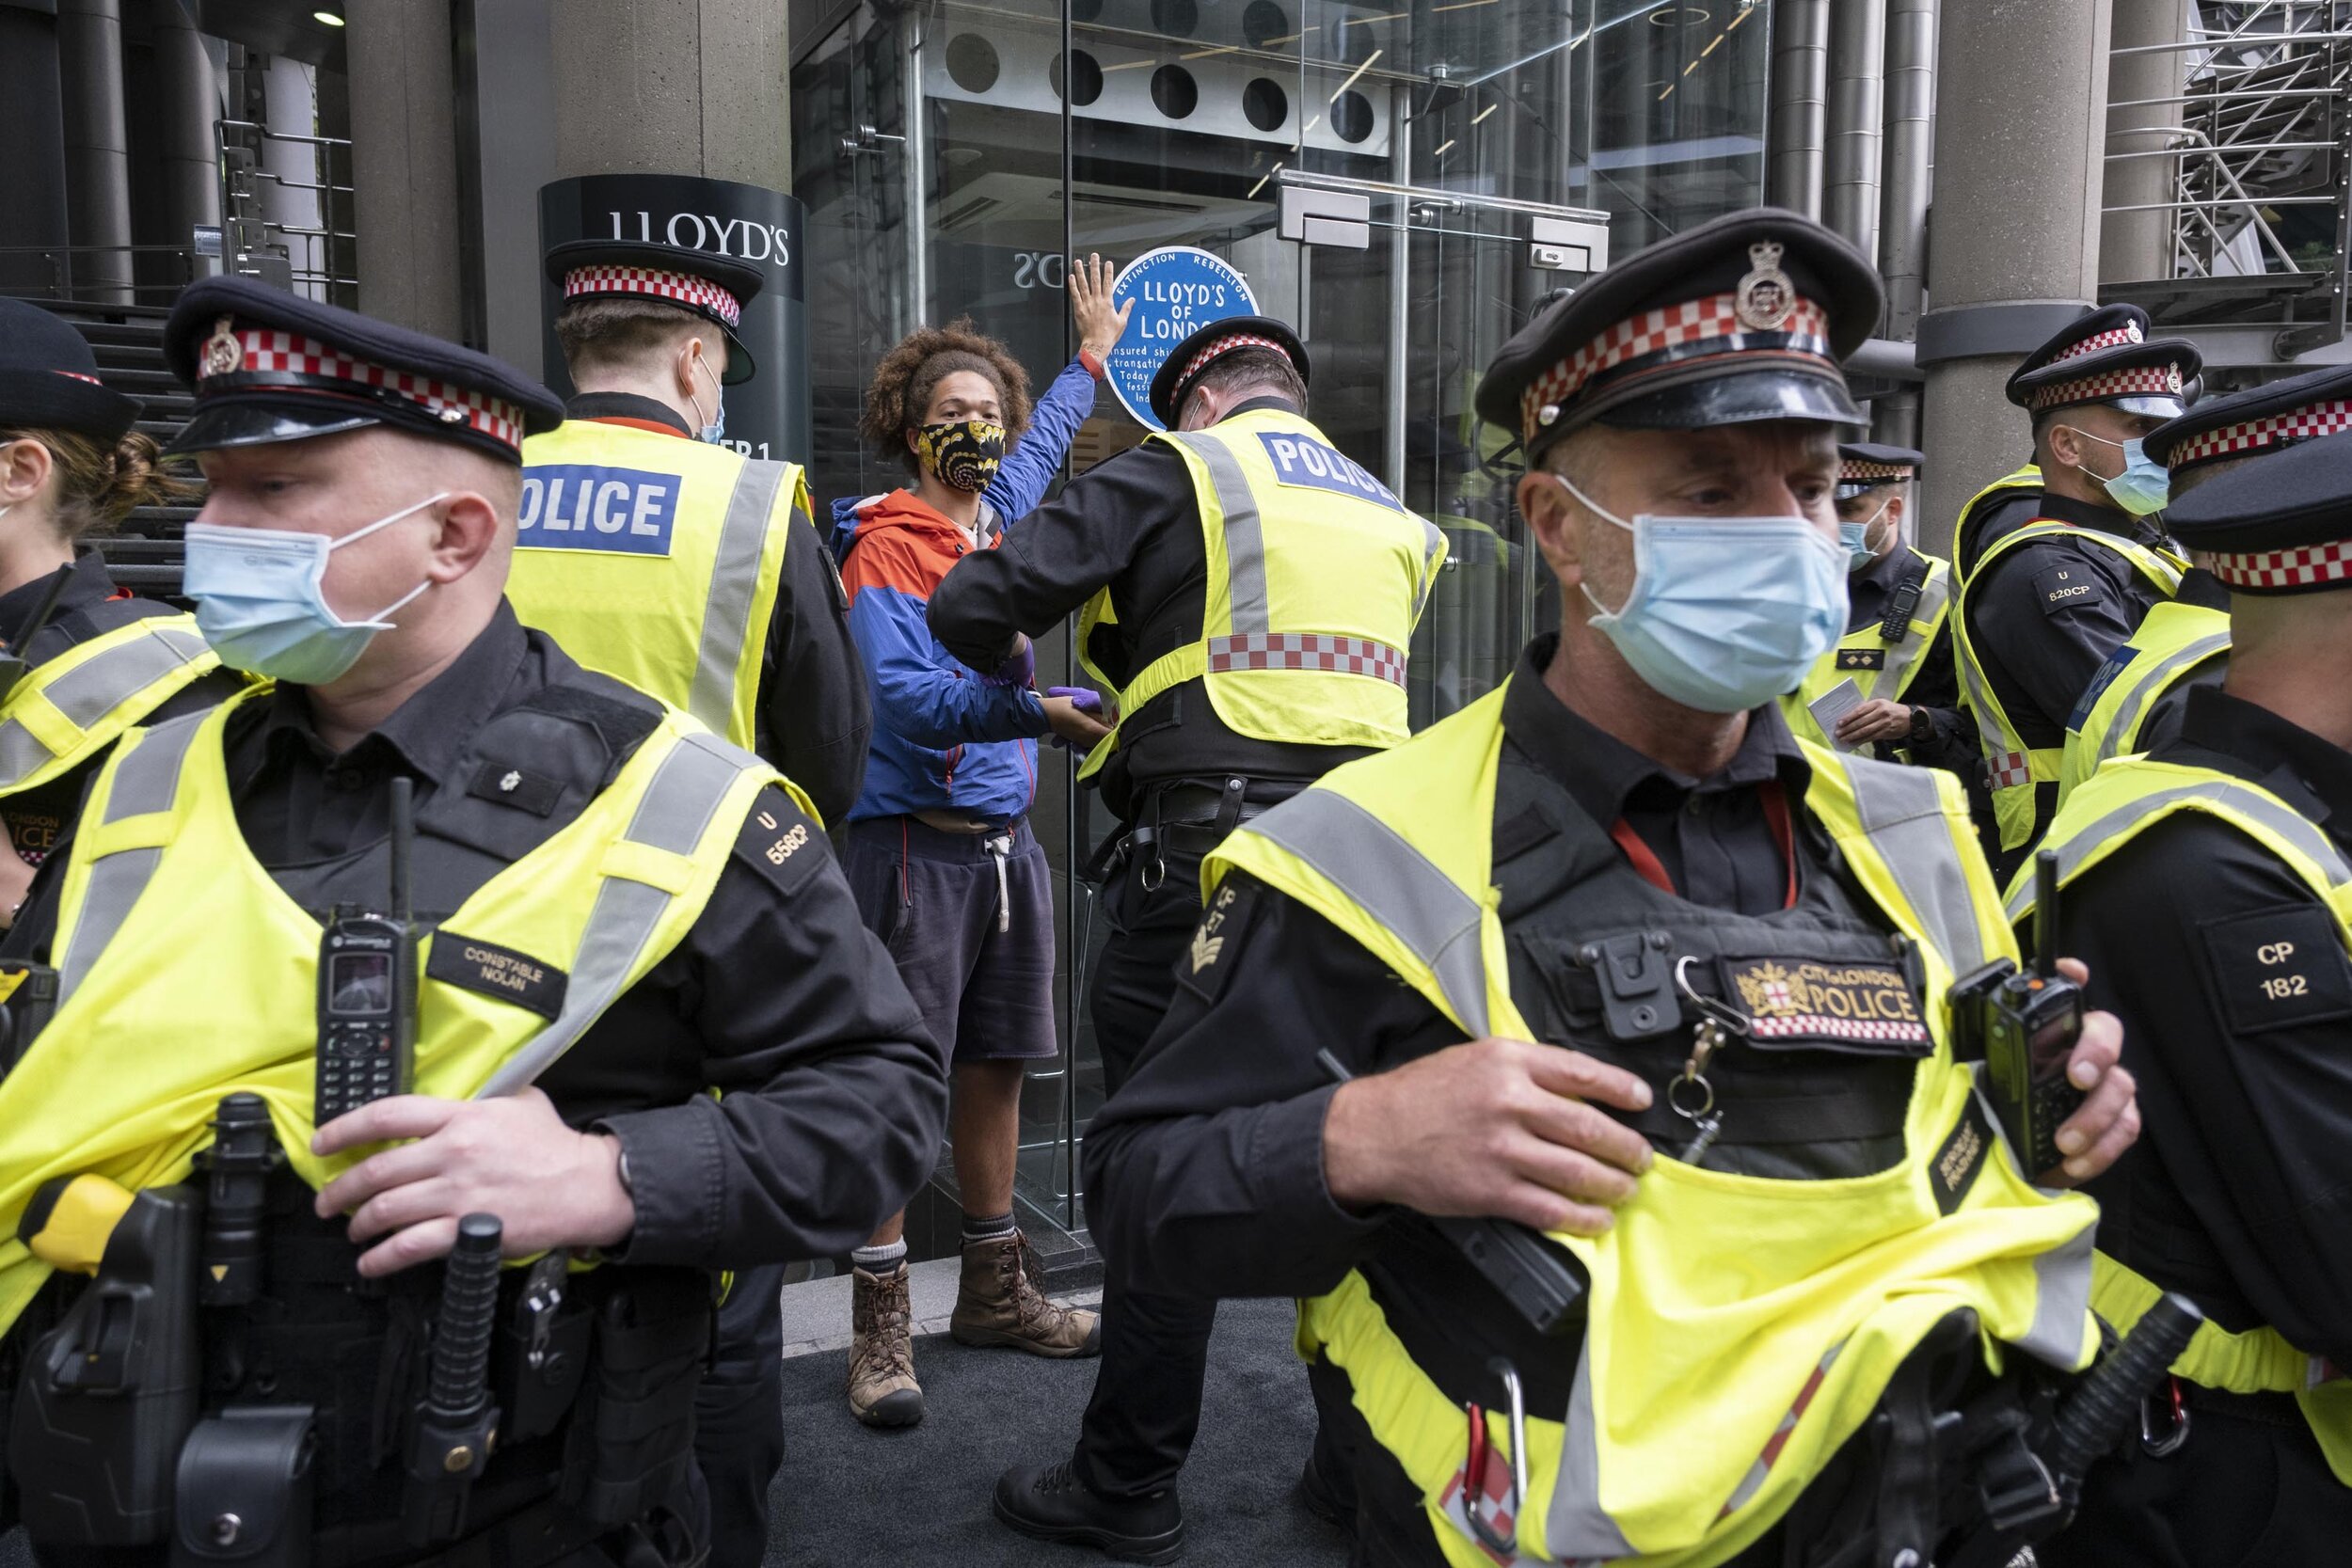  Police talk to a young man who has glued his hand on a blue plaque which talks of links to slavery and fossil fuel projects pasted up outside the Lloyd's of London during the Walk of Shame disruptive march through the City of London. 